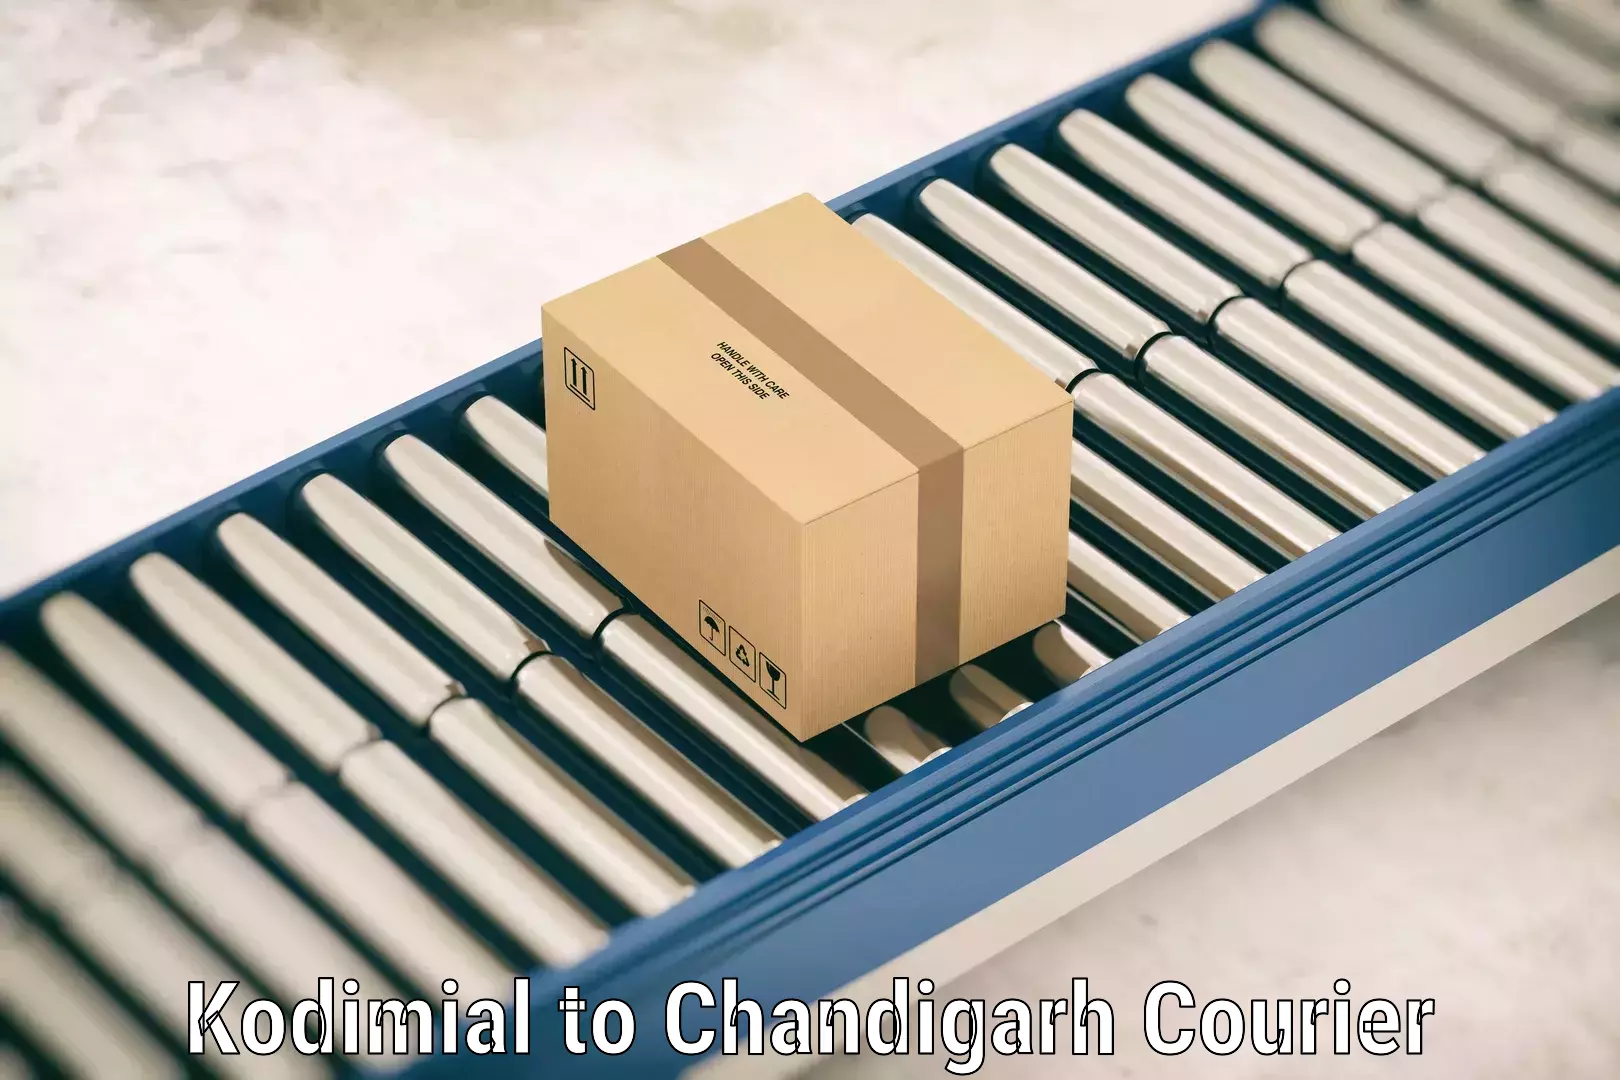 Express luggage delivery Kodimial to Chandigarh